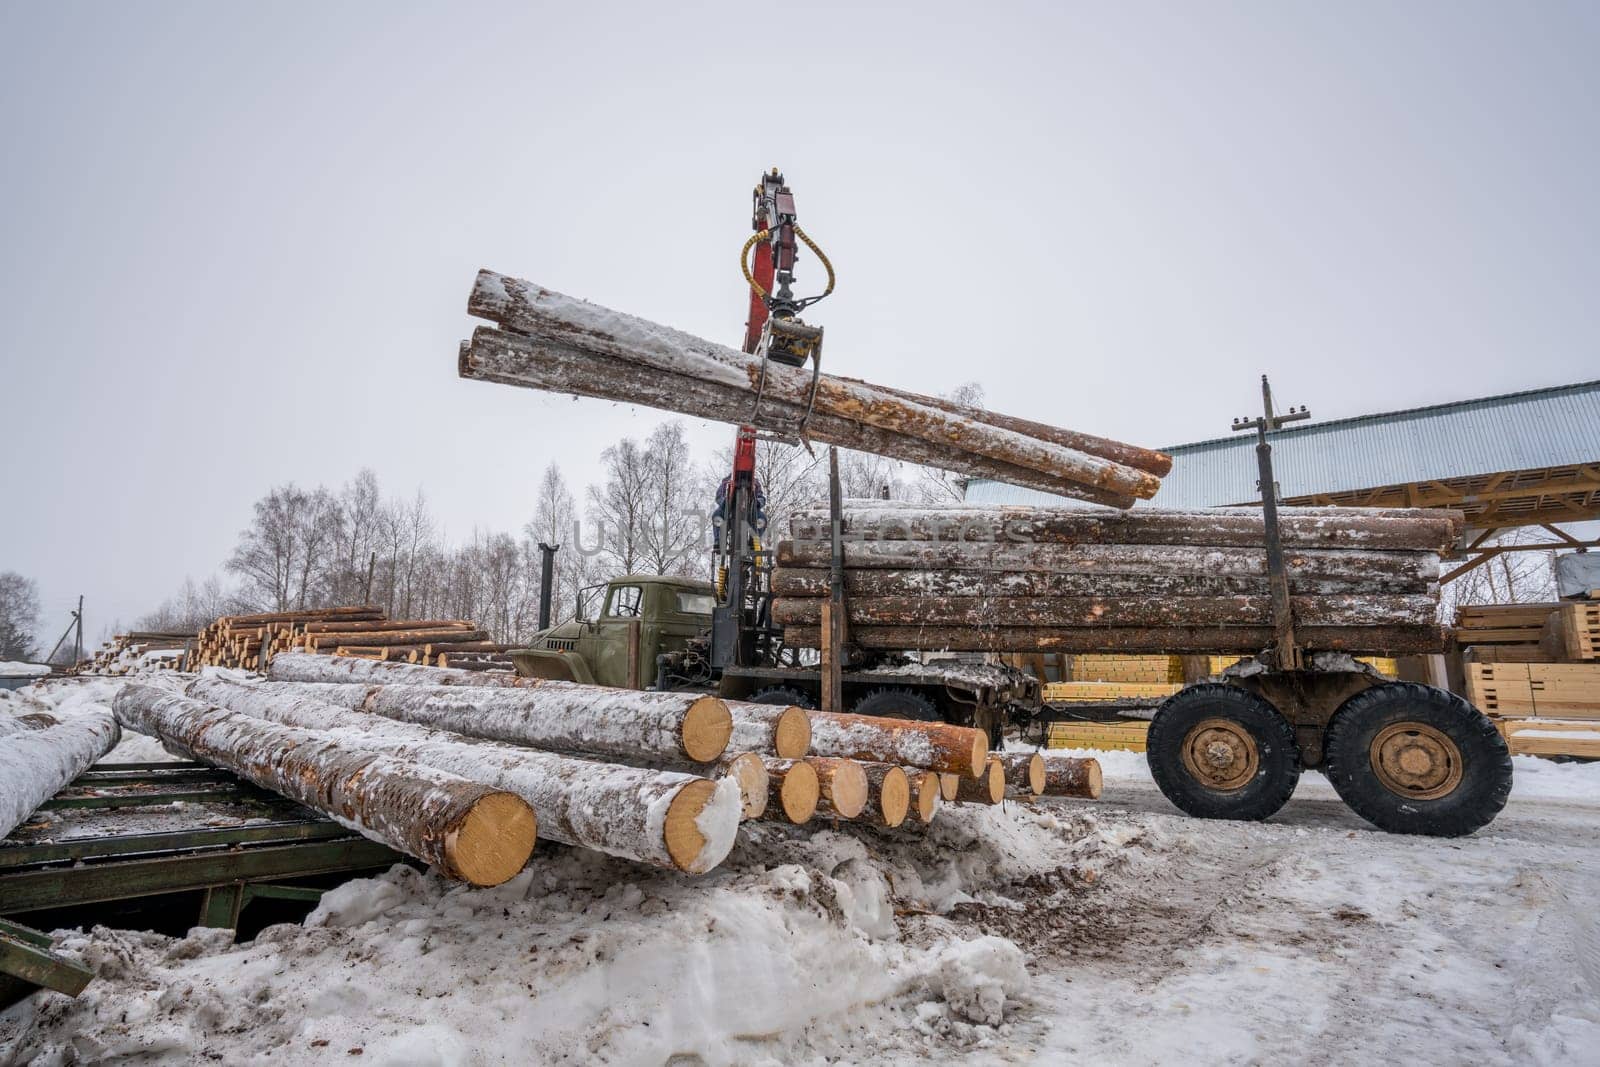 Sawmill in winter. Image of truck loading timber by rivertime